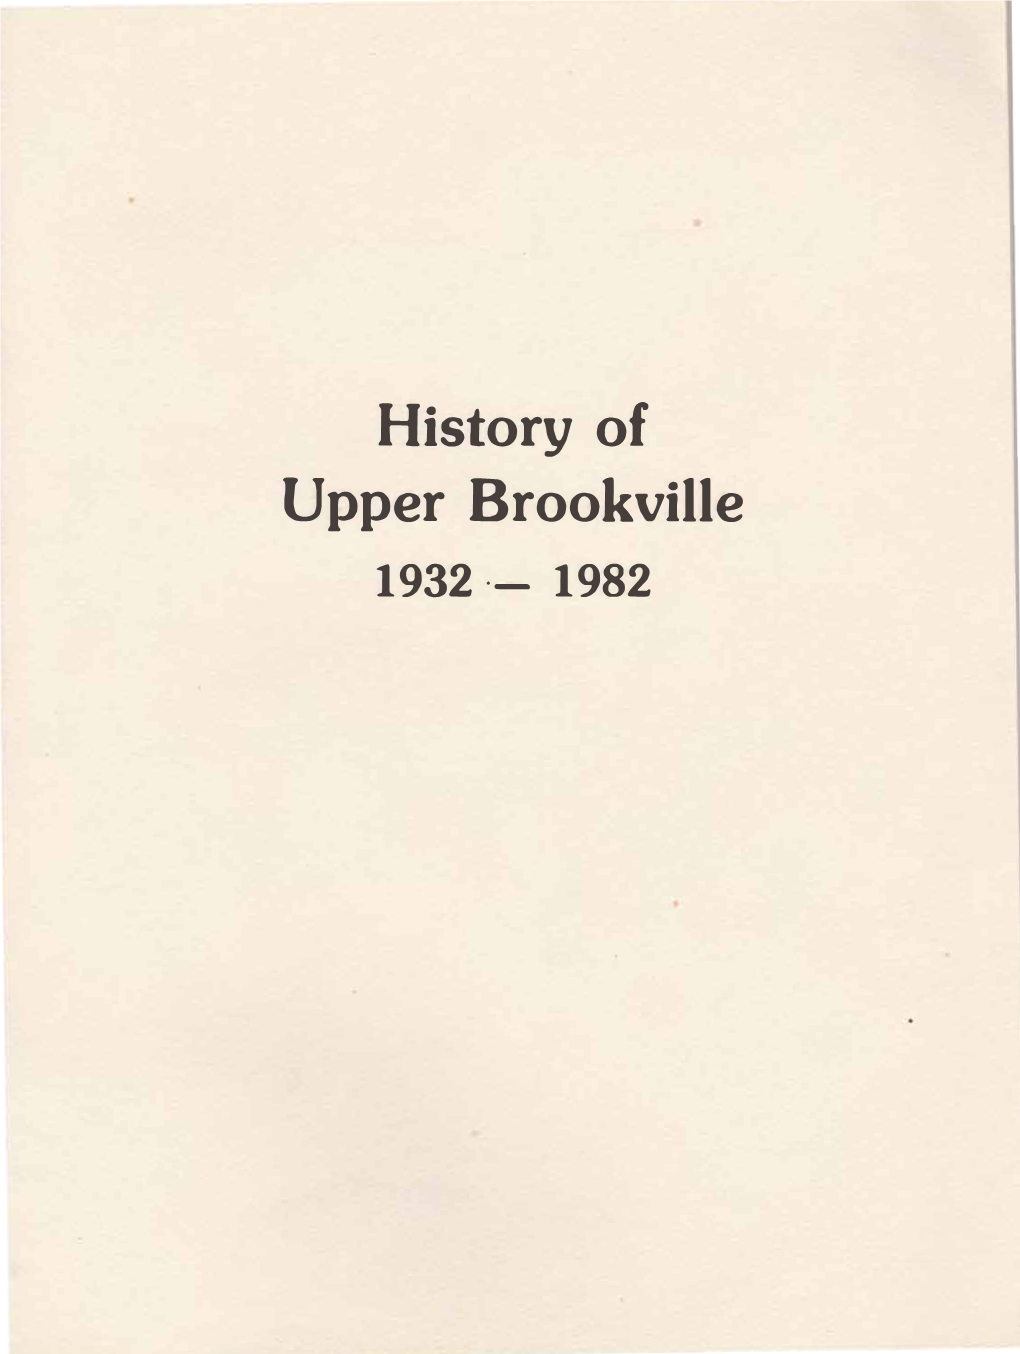 History of Upper Brookville 1932 ·- 1982 INTRODUCTION by ALFRED J